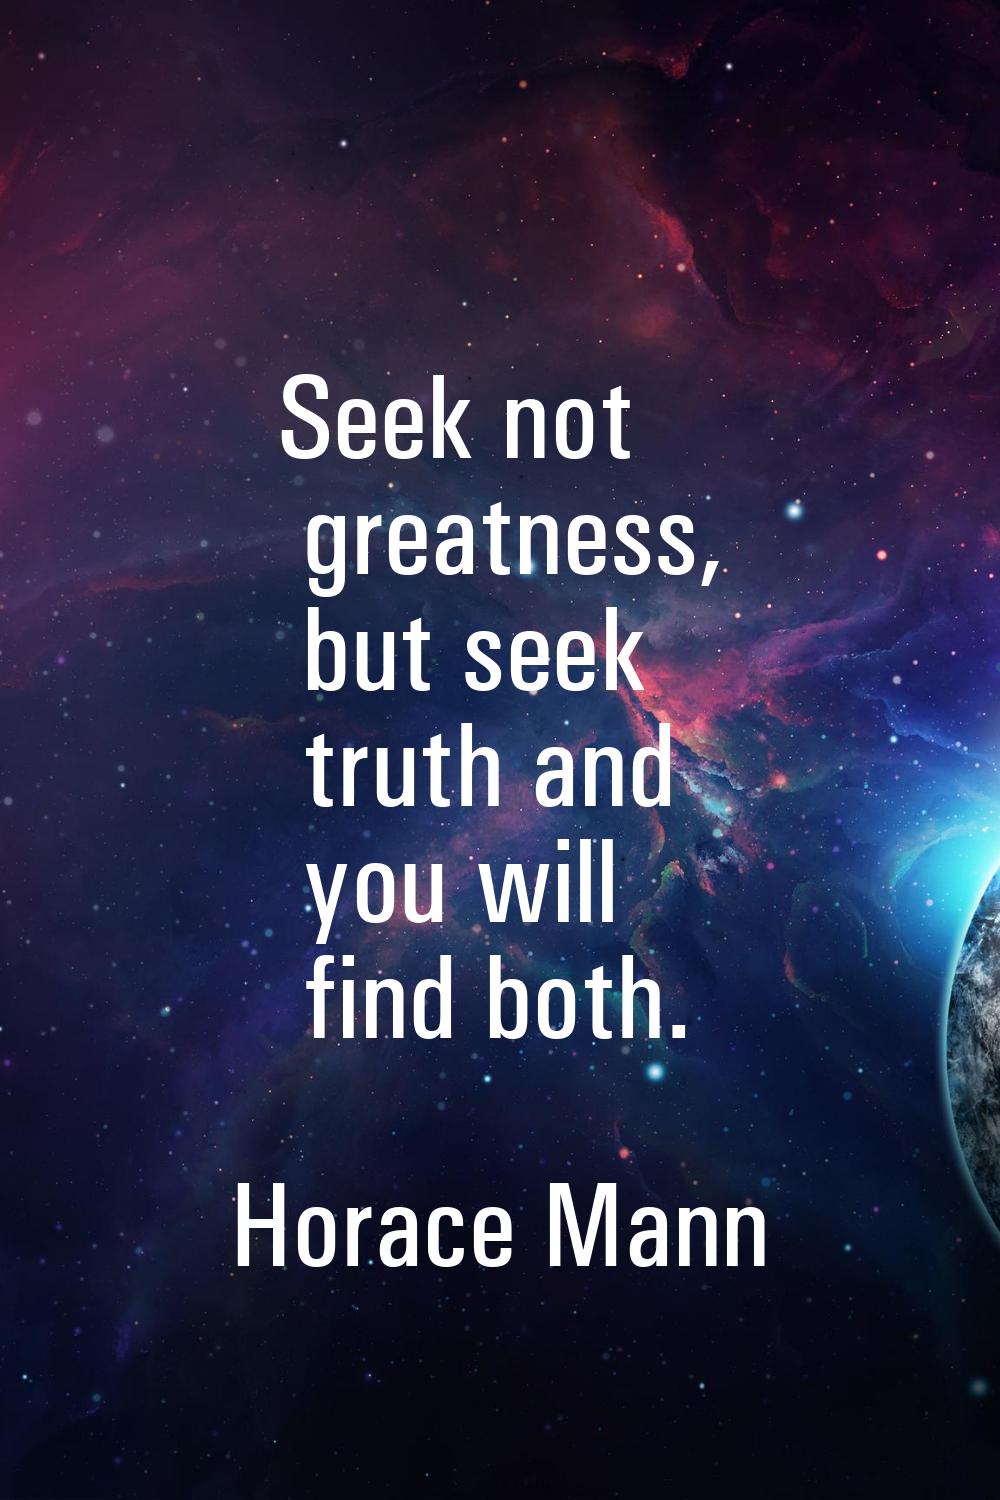 Seek not greatness, but seek truth and you will find both.